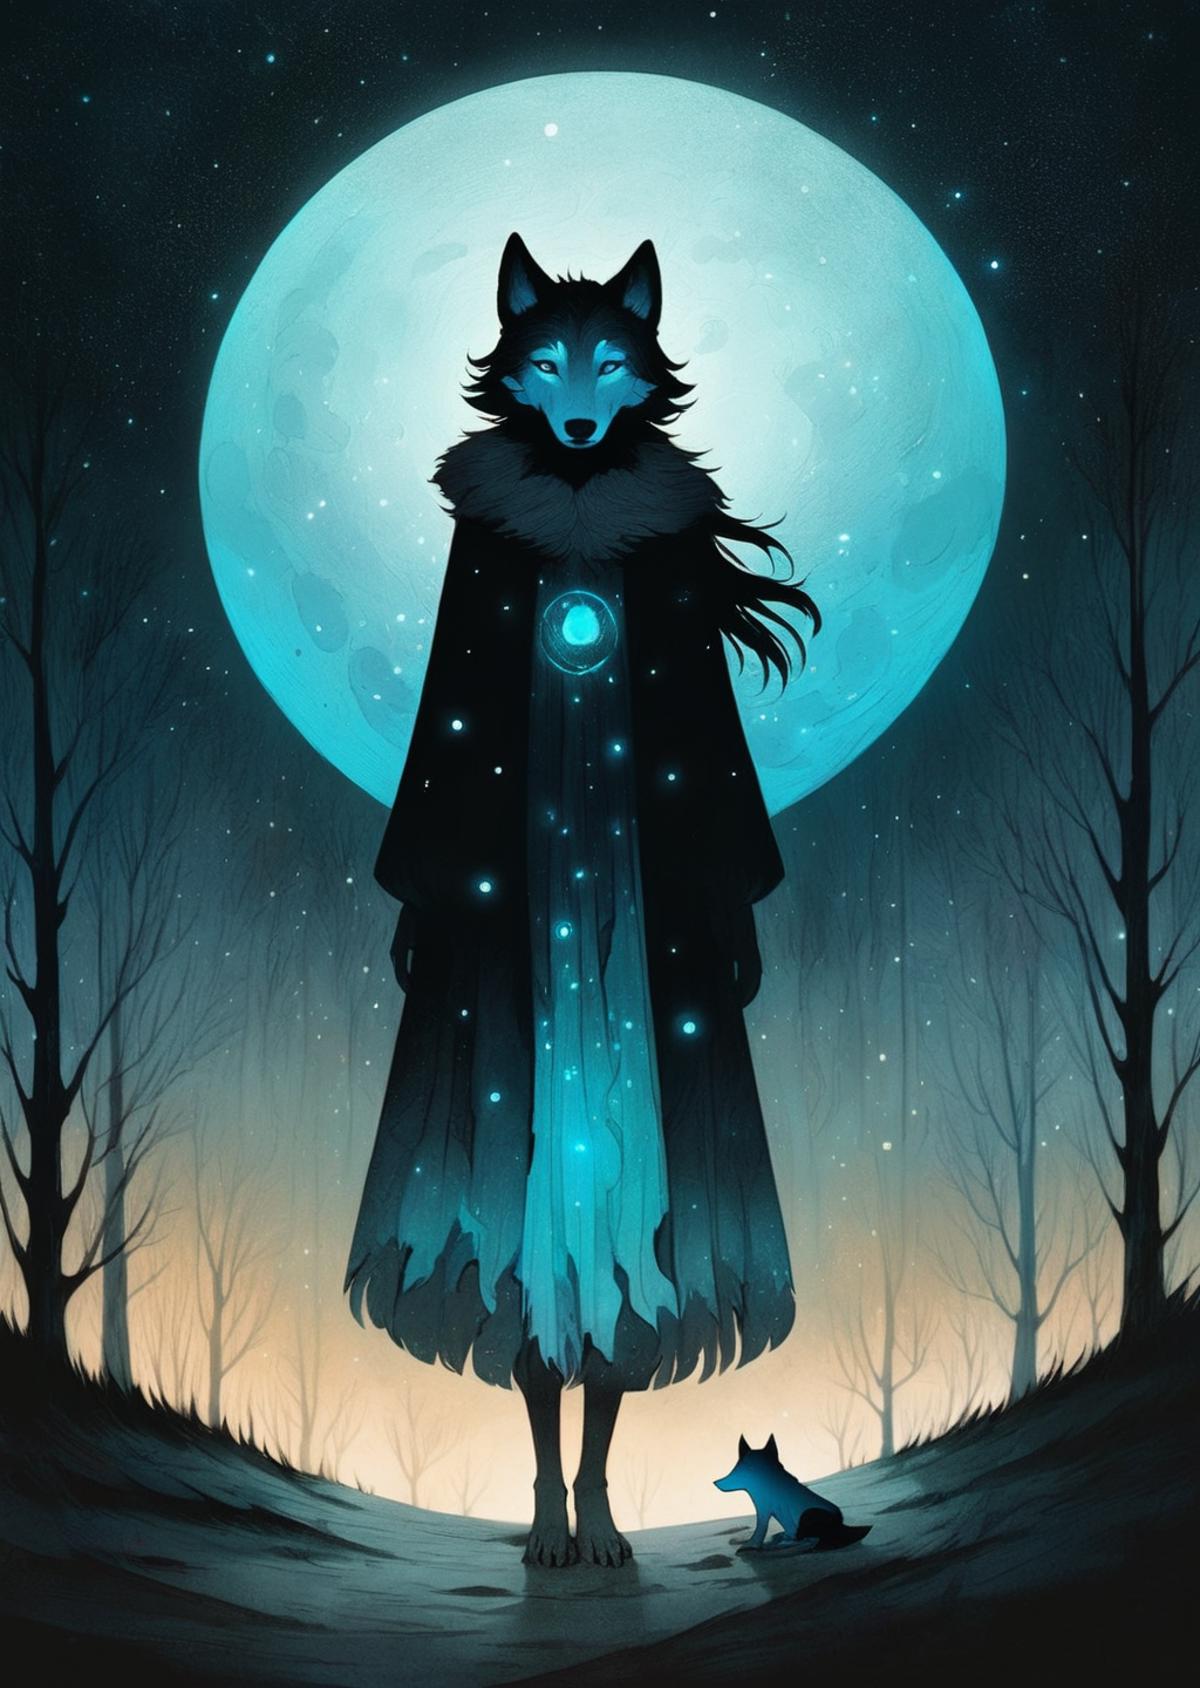 A Wolf-like creature in a dark forest with the full moon in the background.